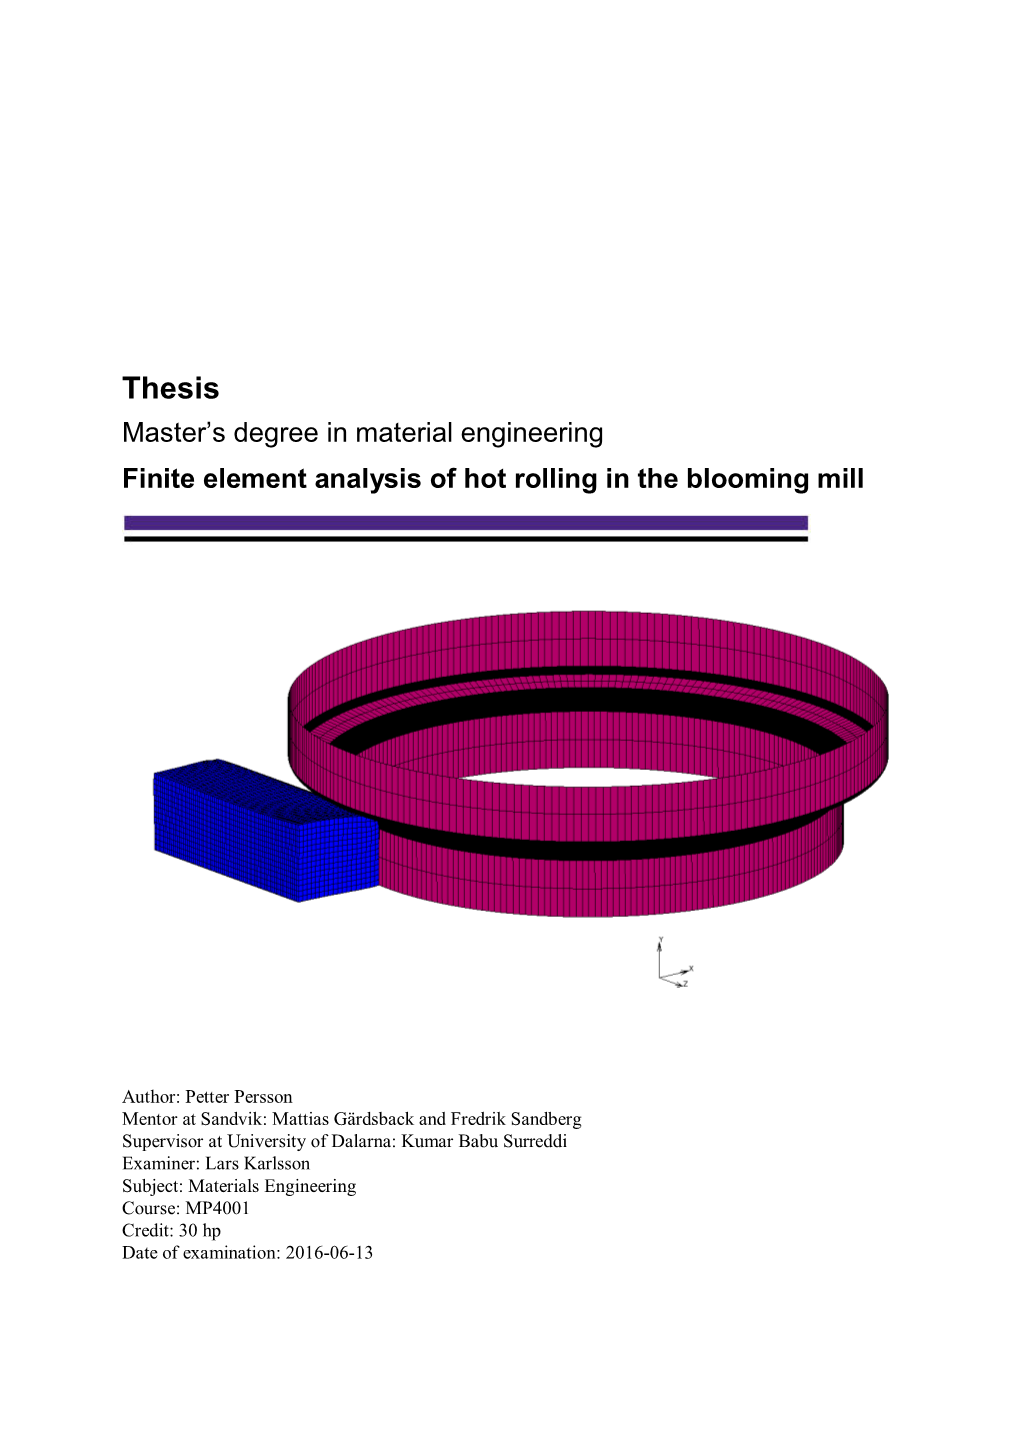 Thesis Master’S Degree in Material Engineering Finite Element Analysis of Hot Rolling in the Blooming Mill